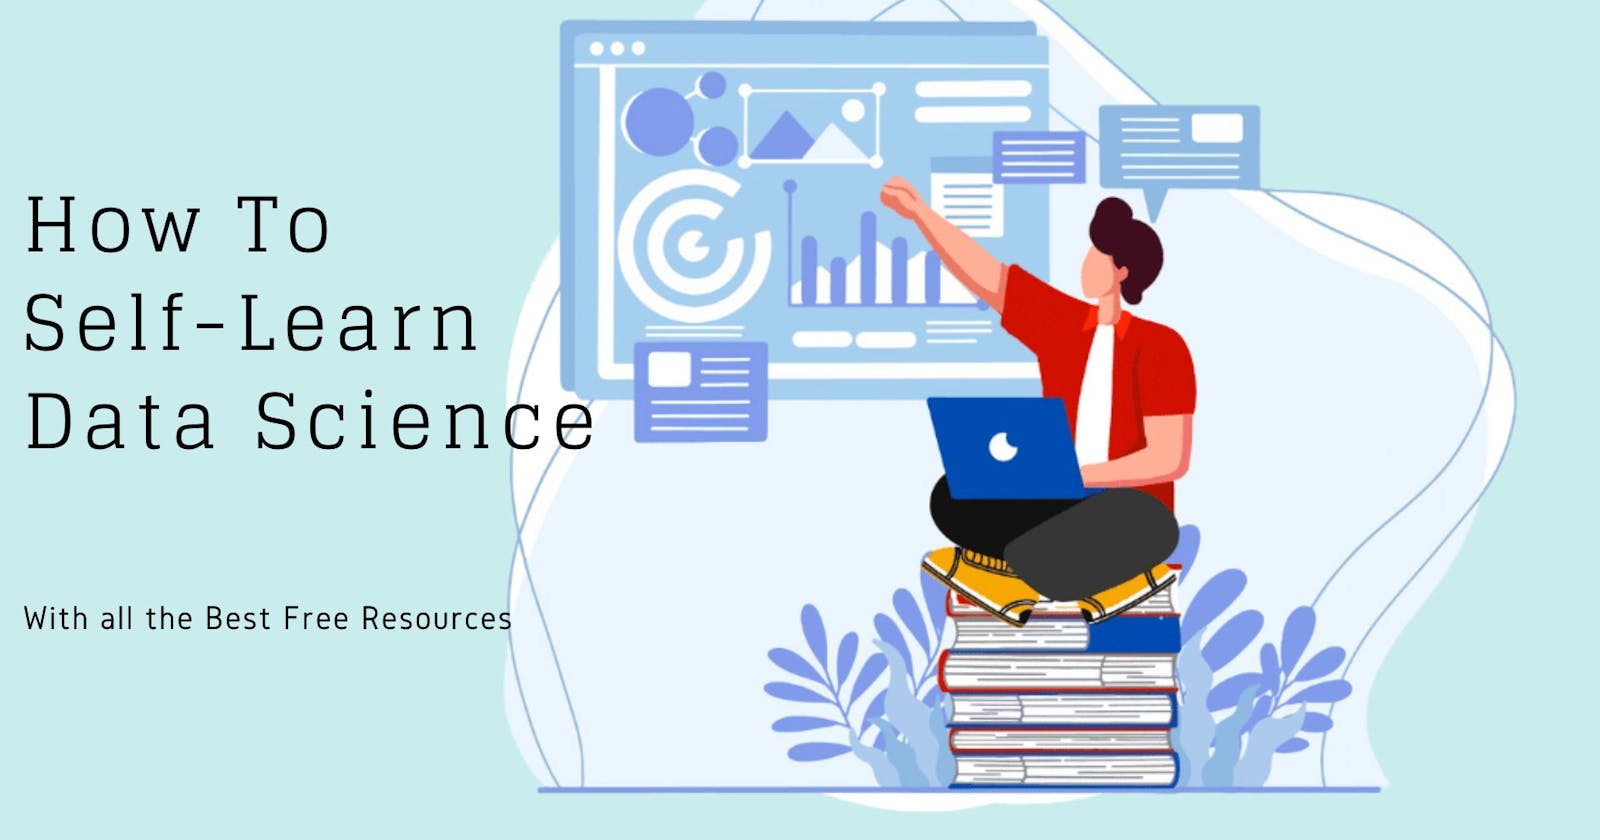 Mastering Data Science Through Self-Learning: Your Roadmap to Essential Topics with Best Resources